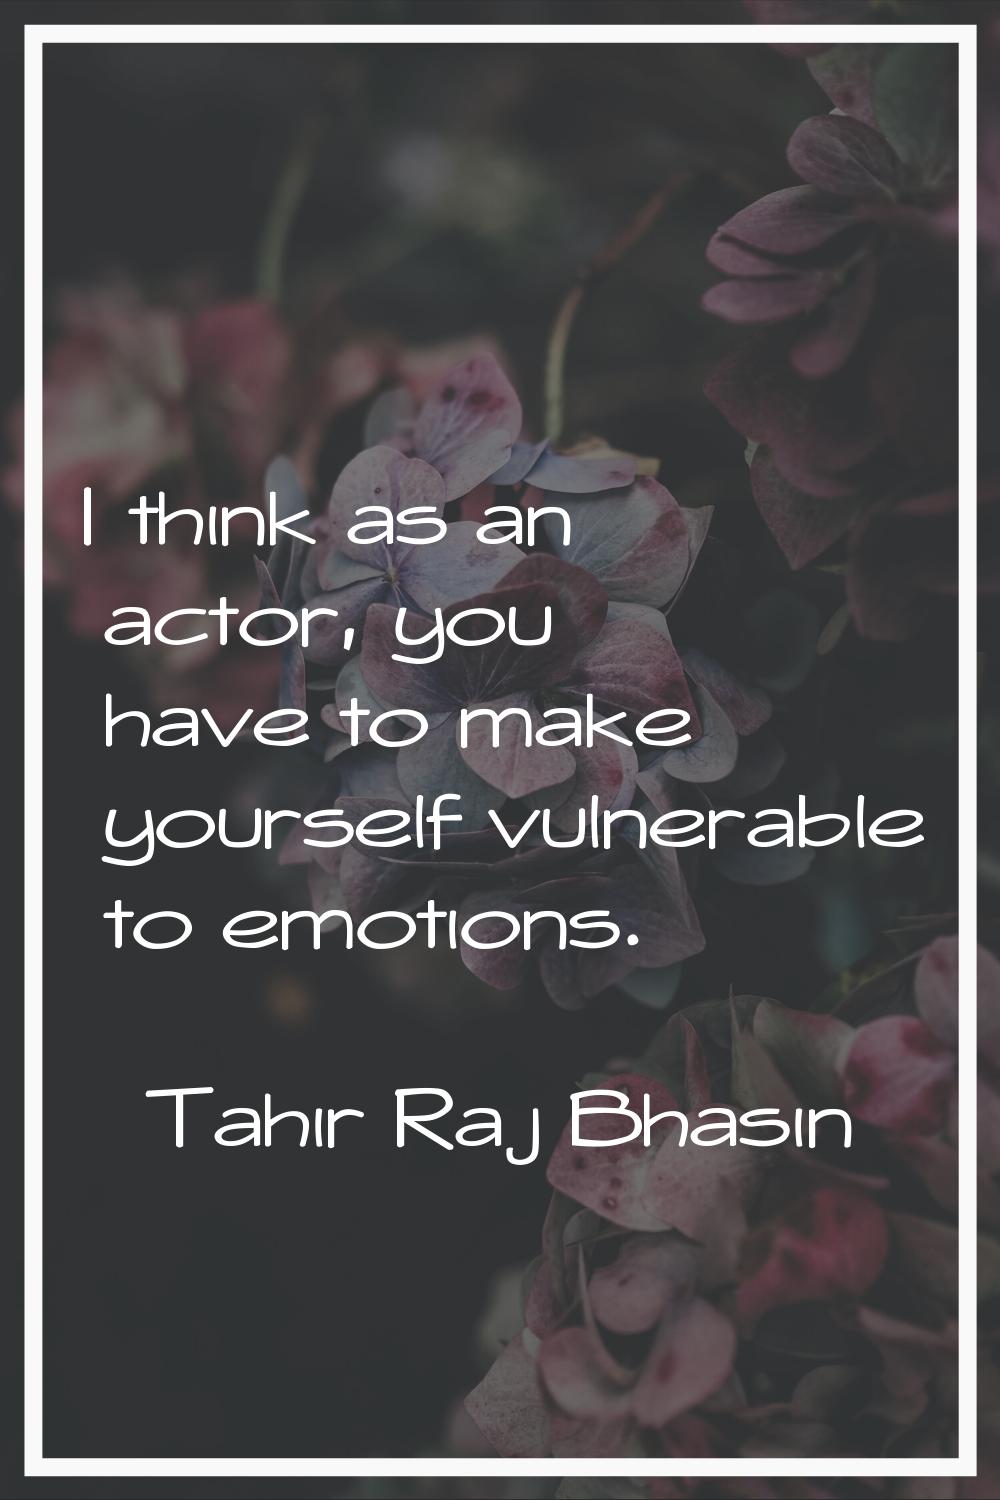 I think as an actor, you have to make yourself vulnerable to emotions.